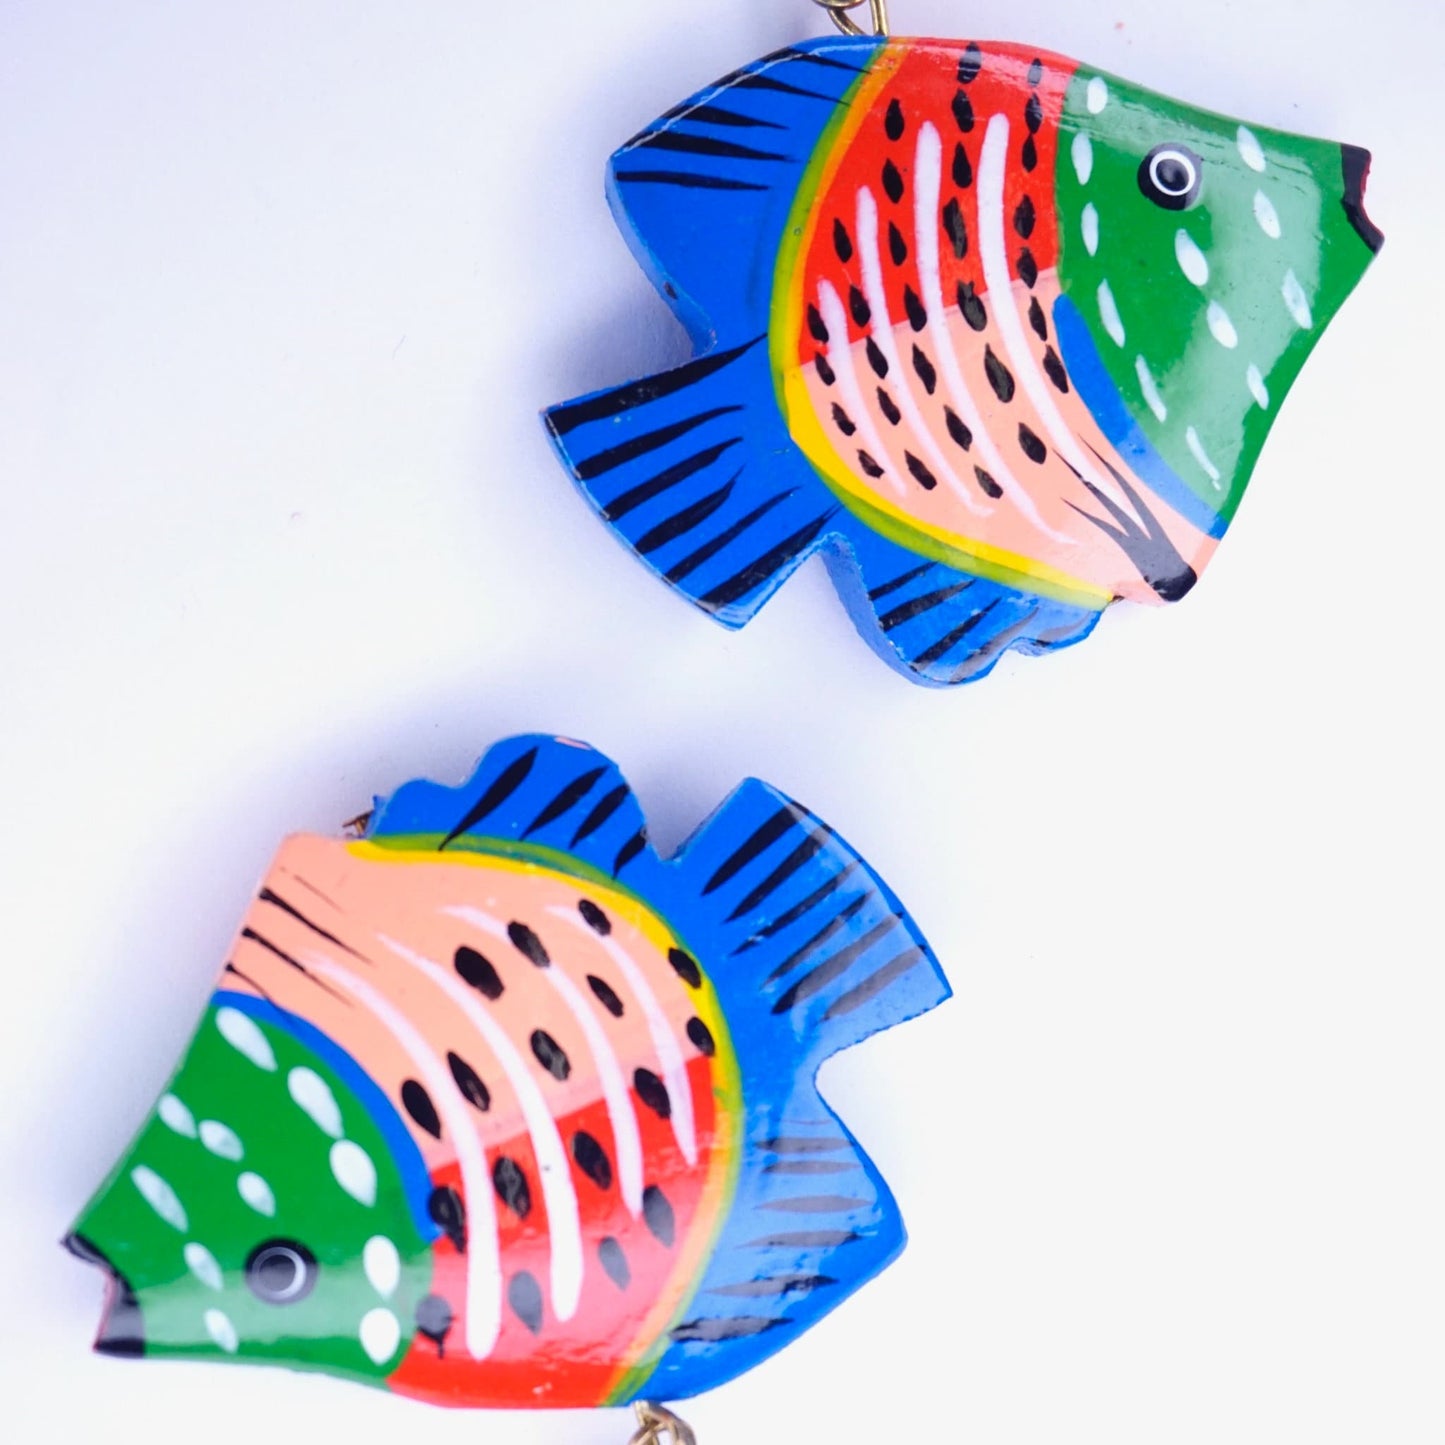 Colorful vintage wood carved fish earrings with vibrant painted details, cute handmade wooden dangle statement accessories.